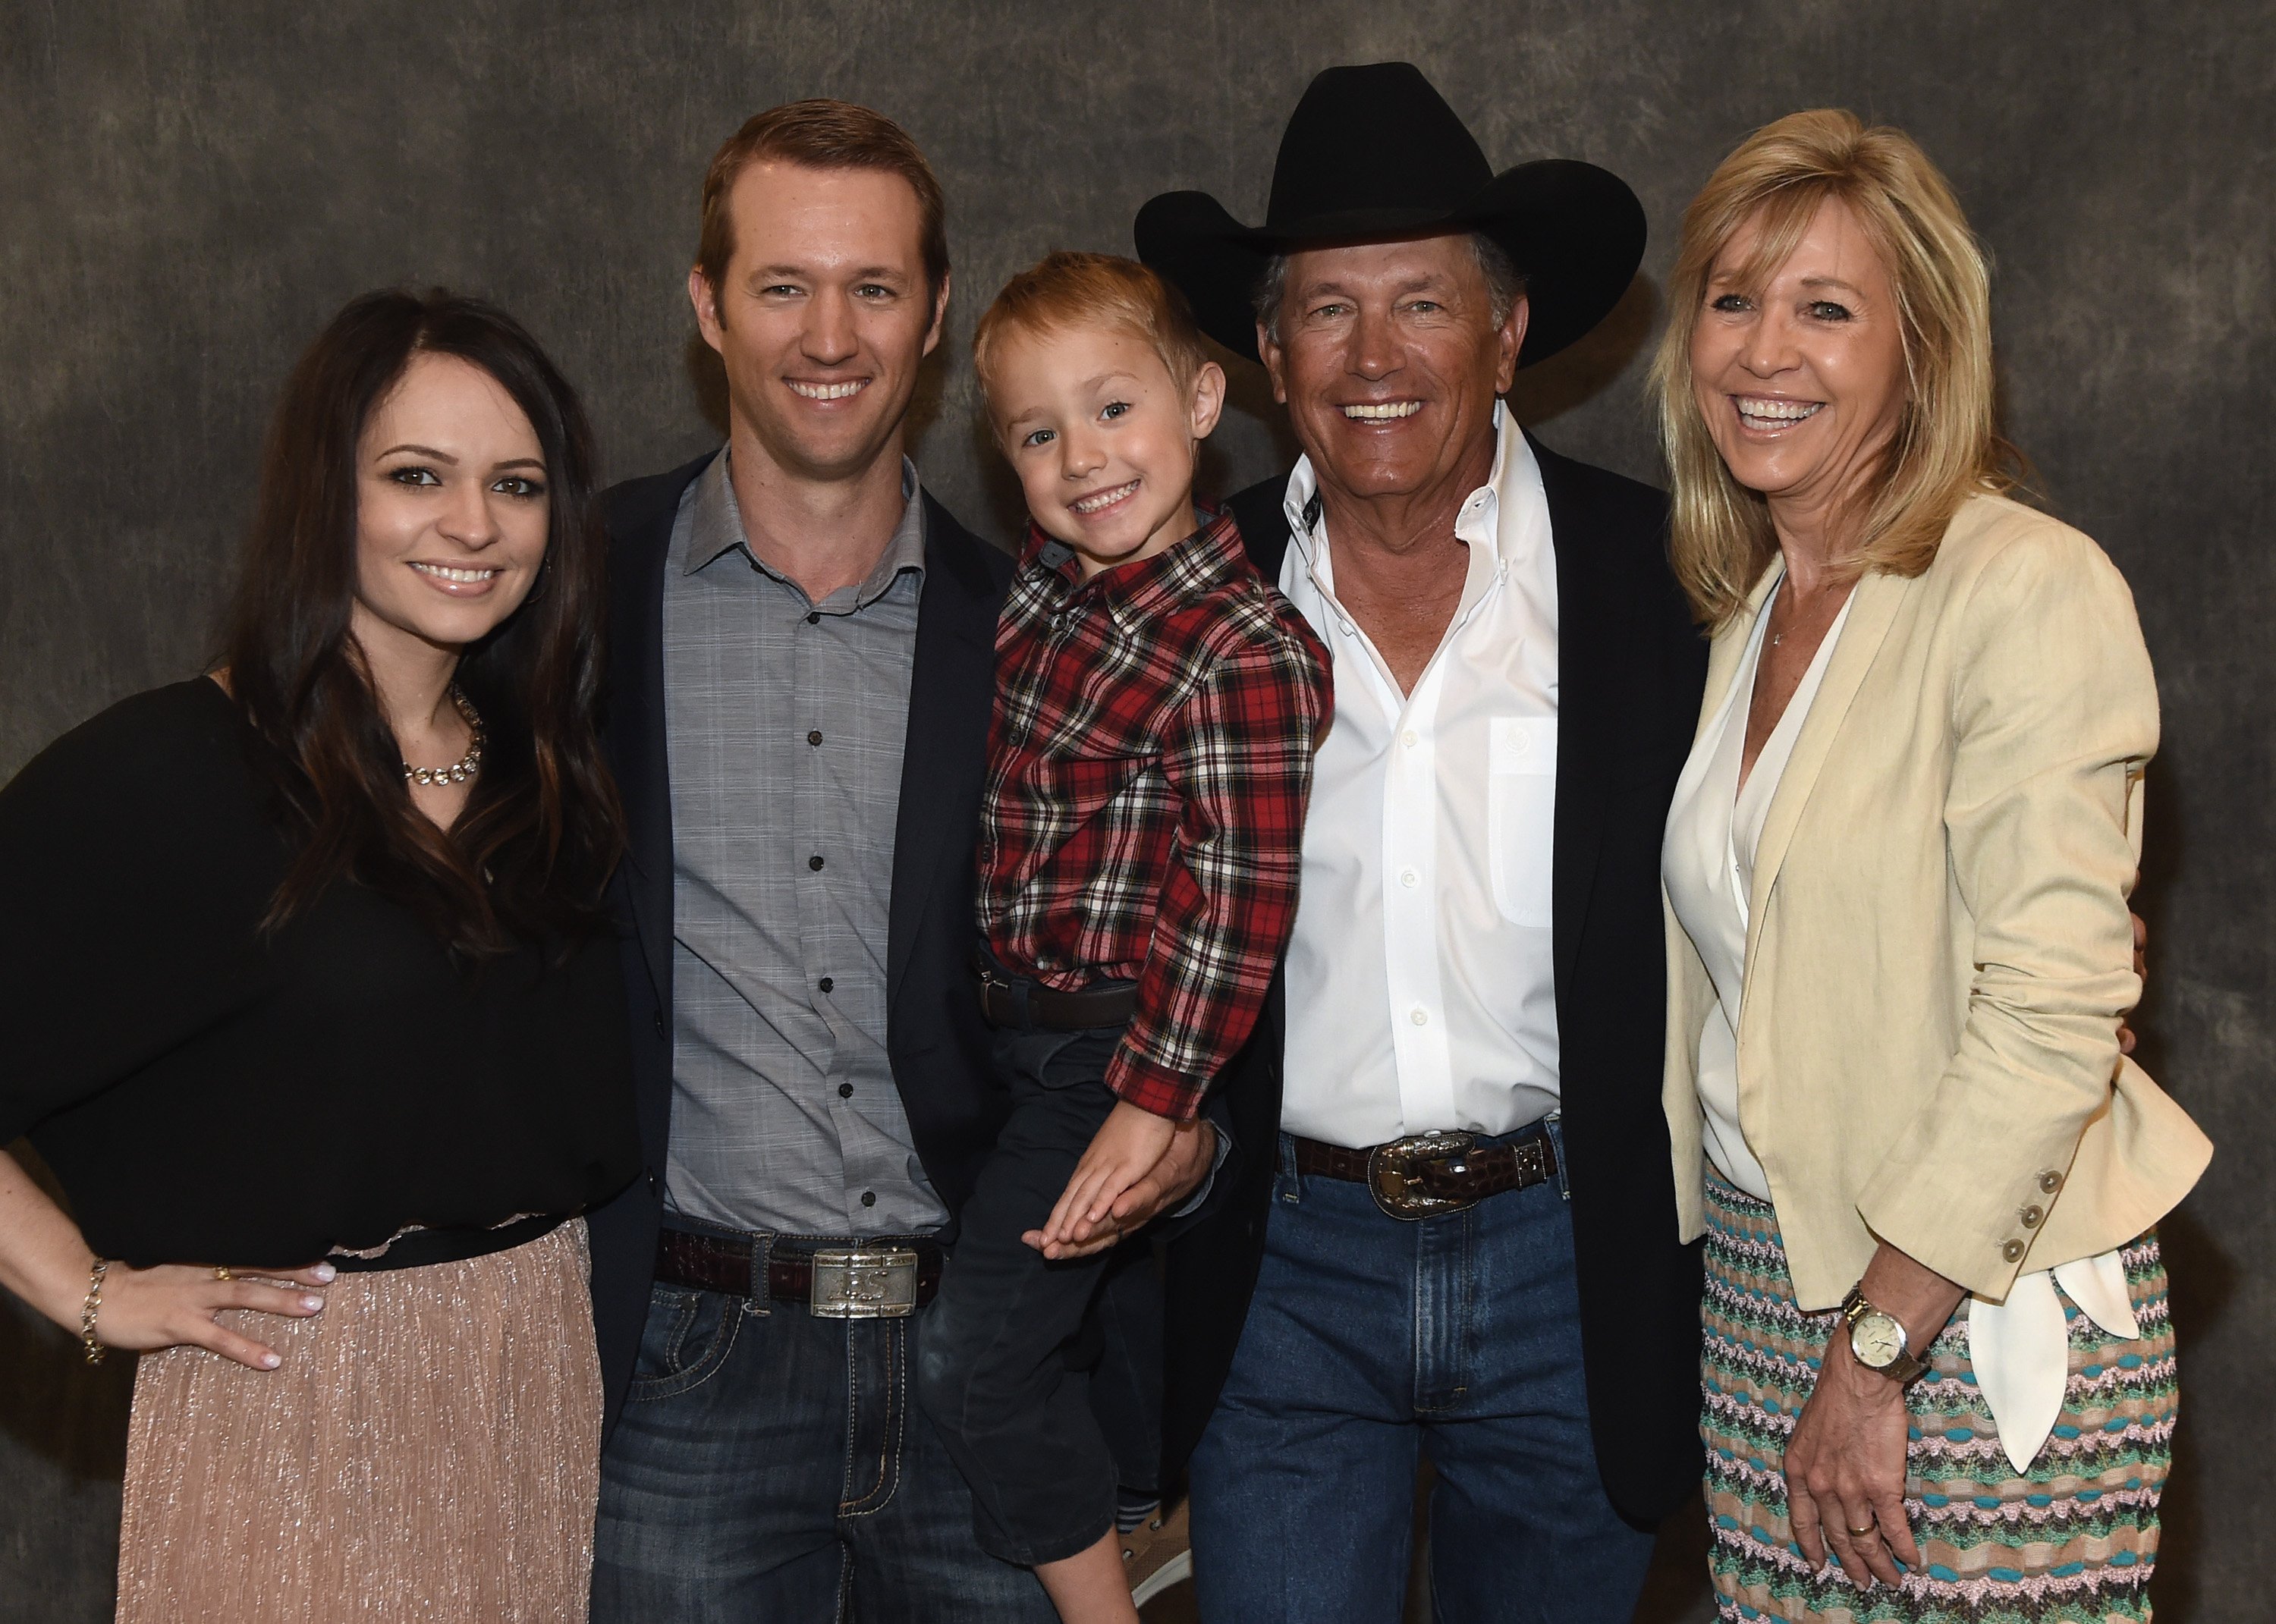 George Strait and family attend George Strait Honored as Texan of the Year at New Braunfels' Chamber of Commerce on March 23, 2018, in New Braunfels, Texas. | Source: Getty Images